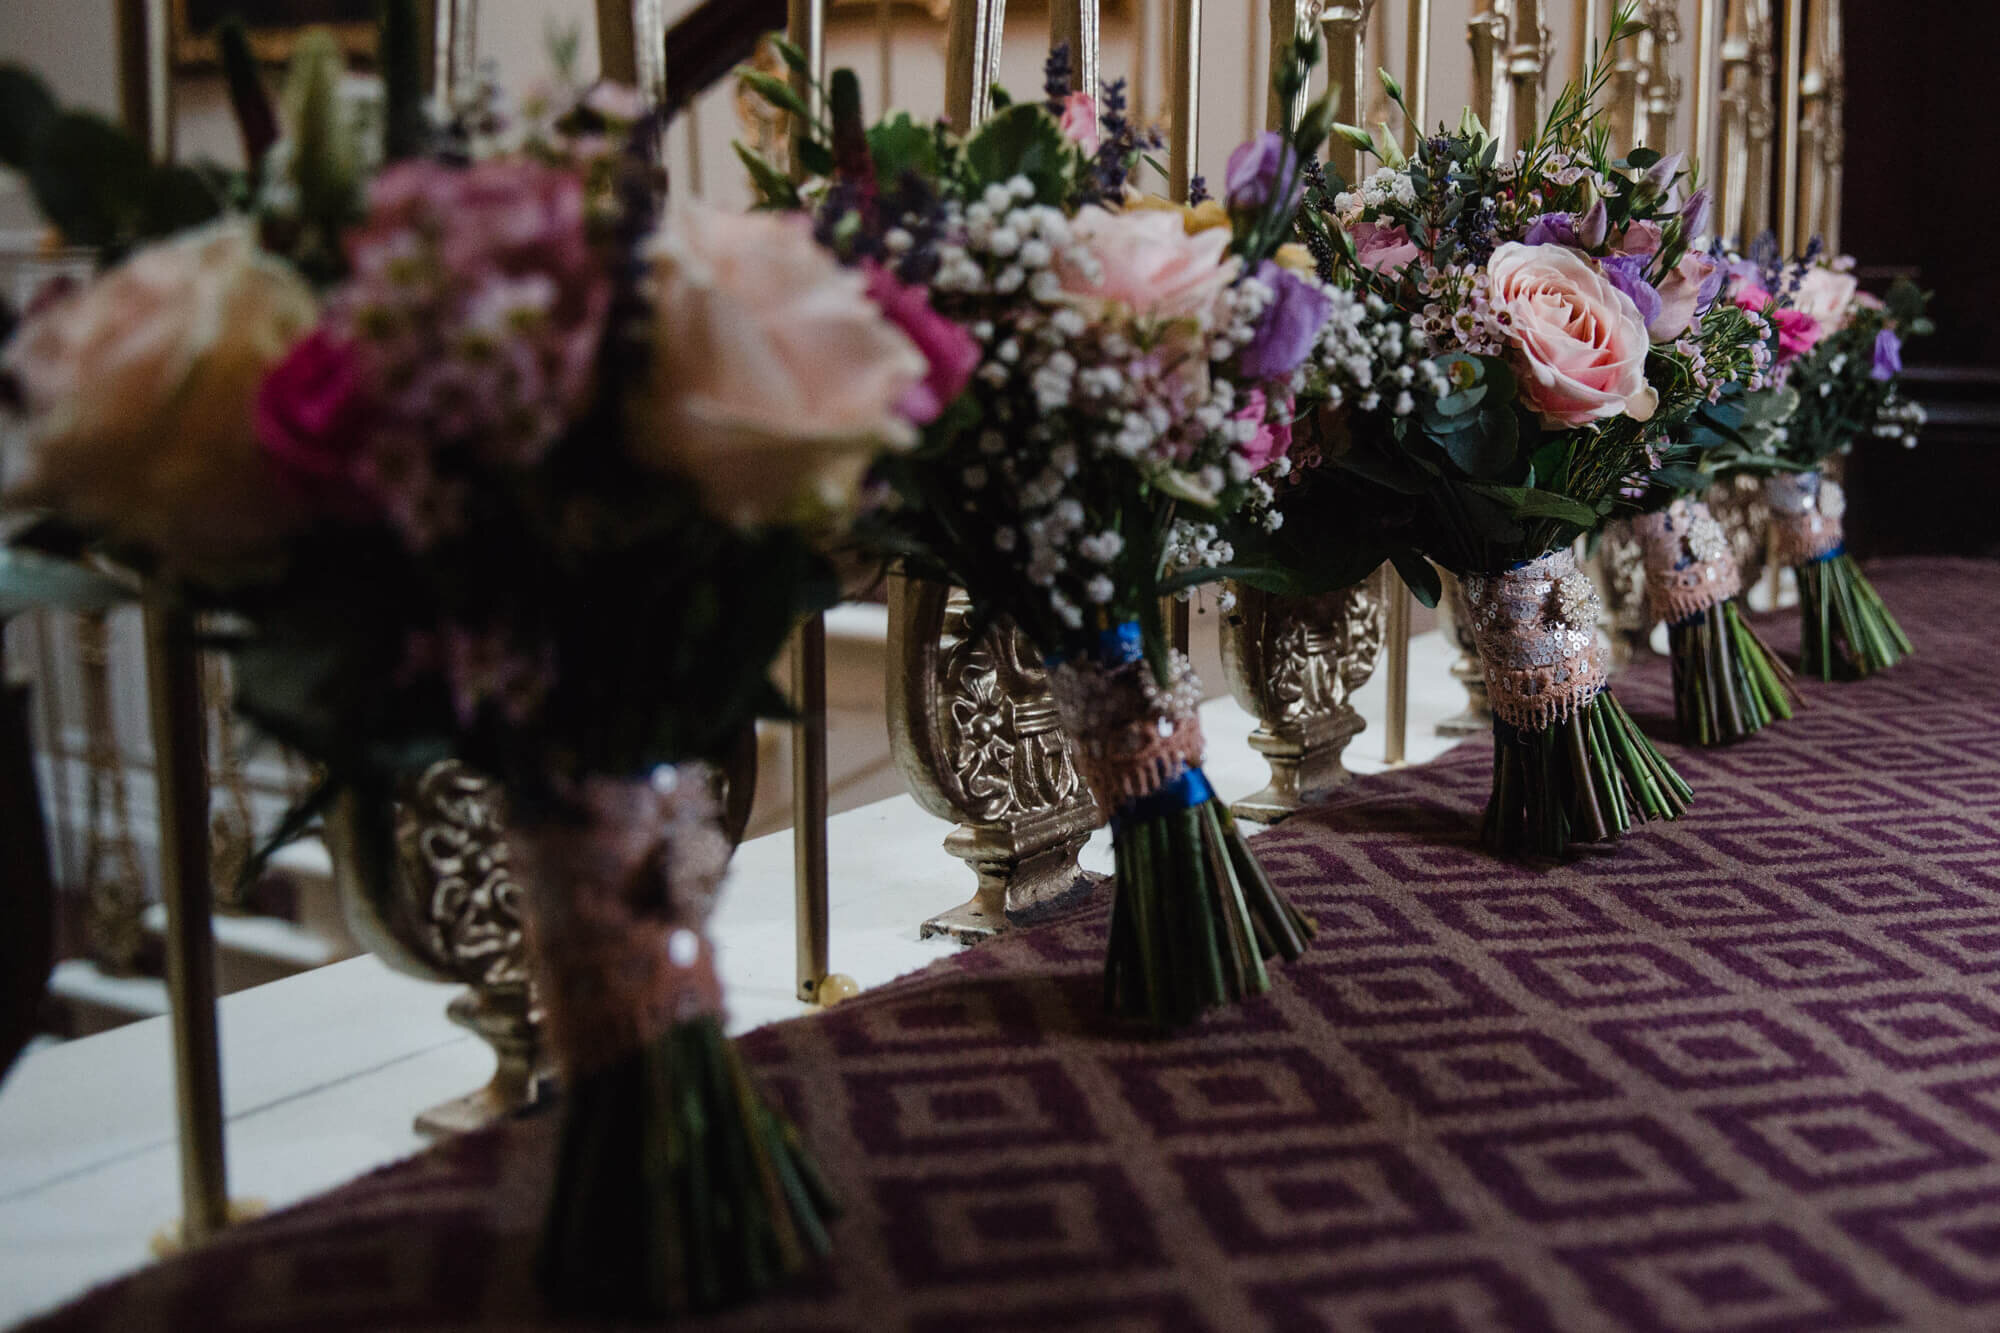 Floral bouquets lined up against bannister on staircase